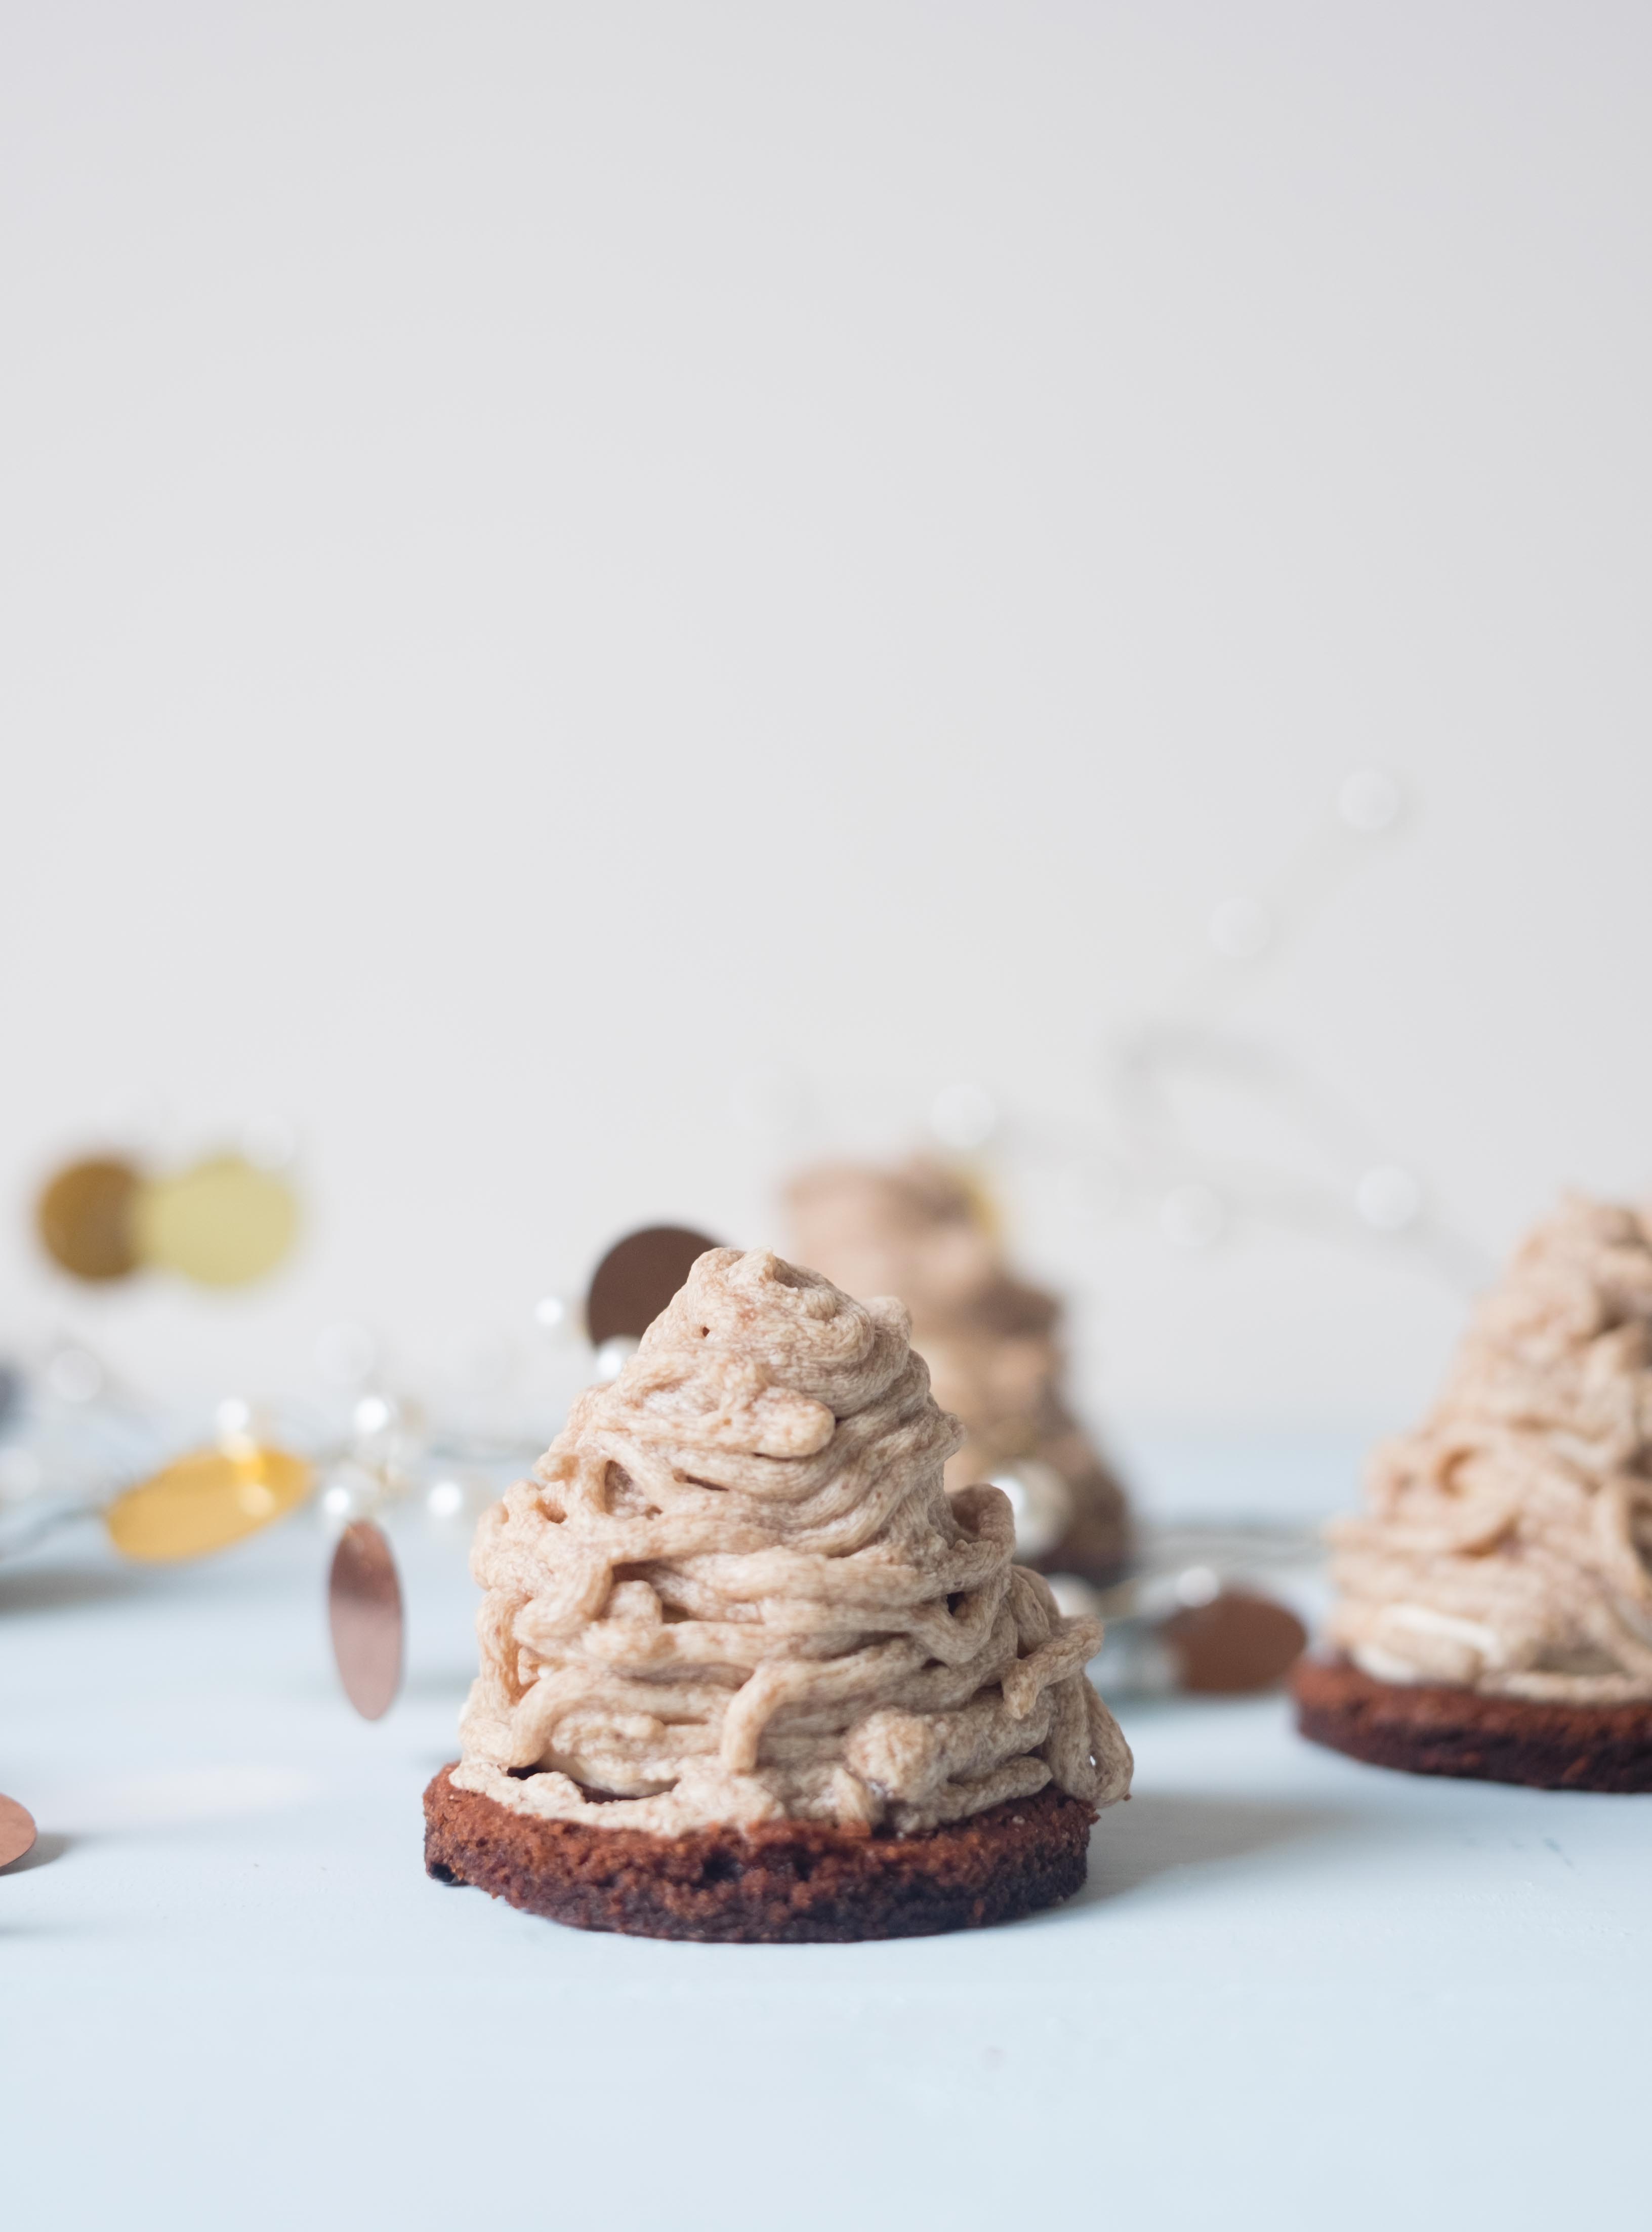 How To Make The Iconic Mont Blanc Chestnut Dessert | Patisserie Makes ...